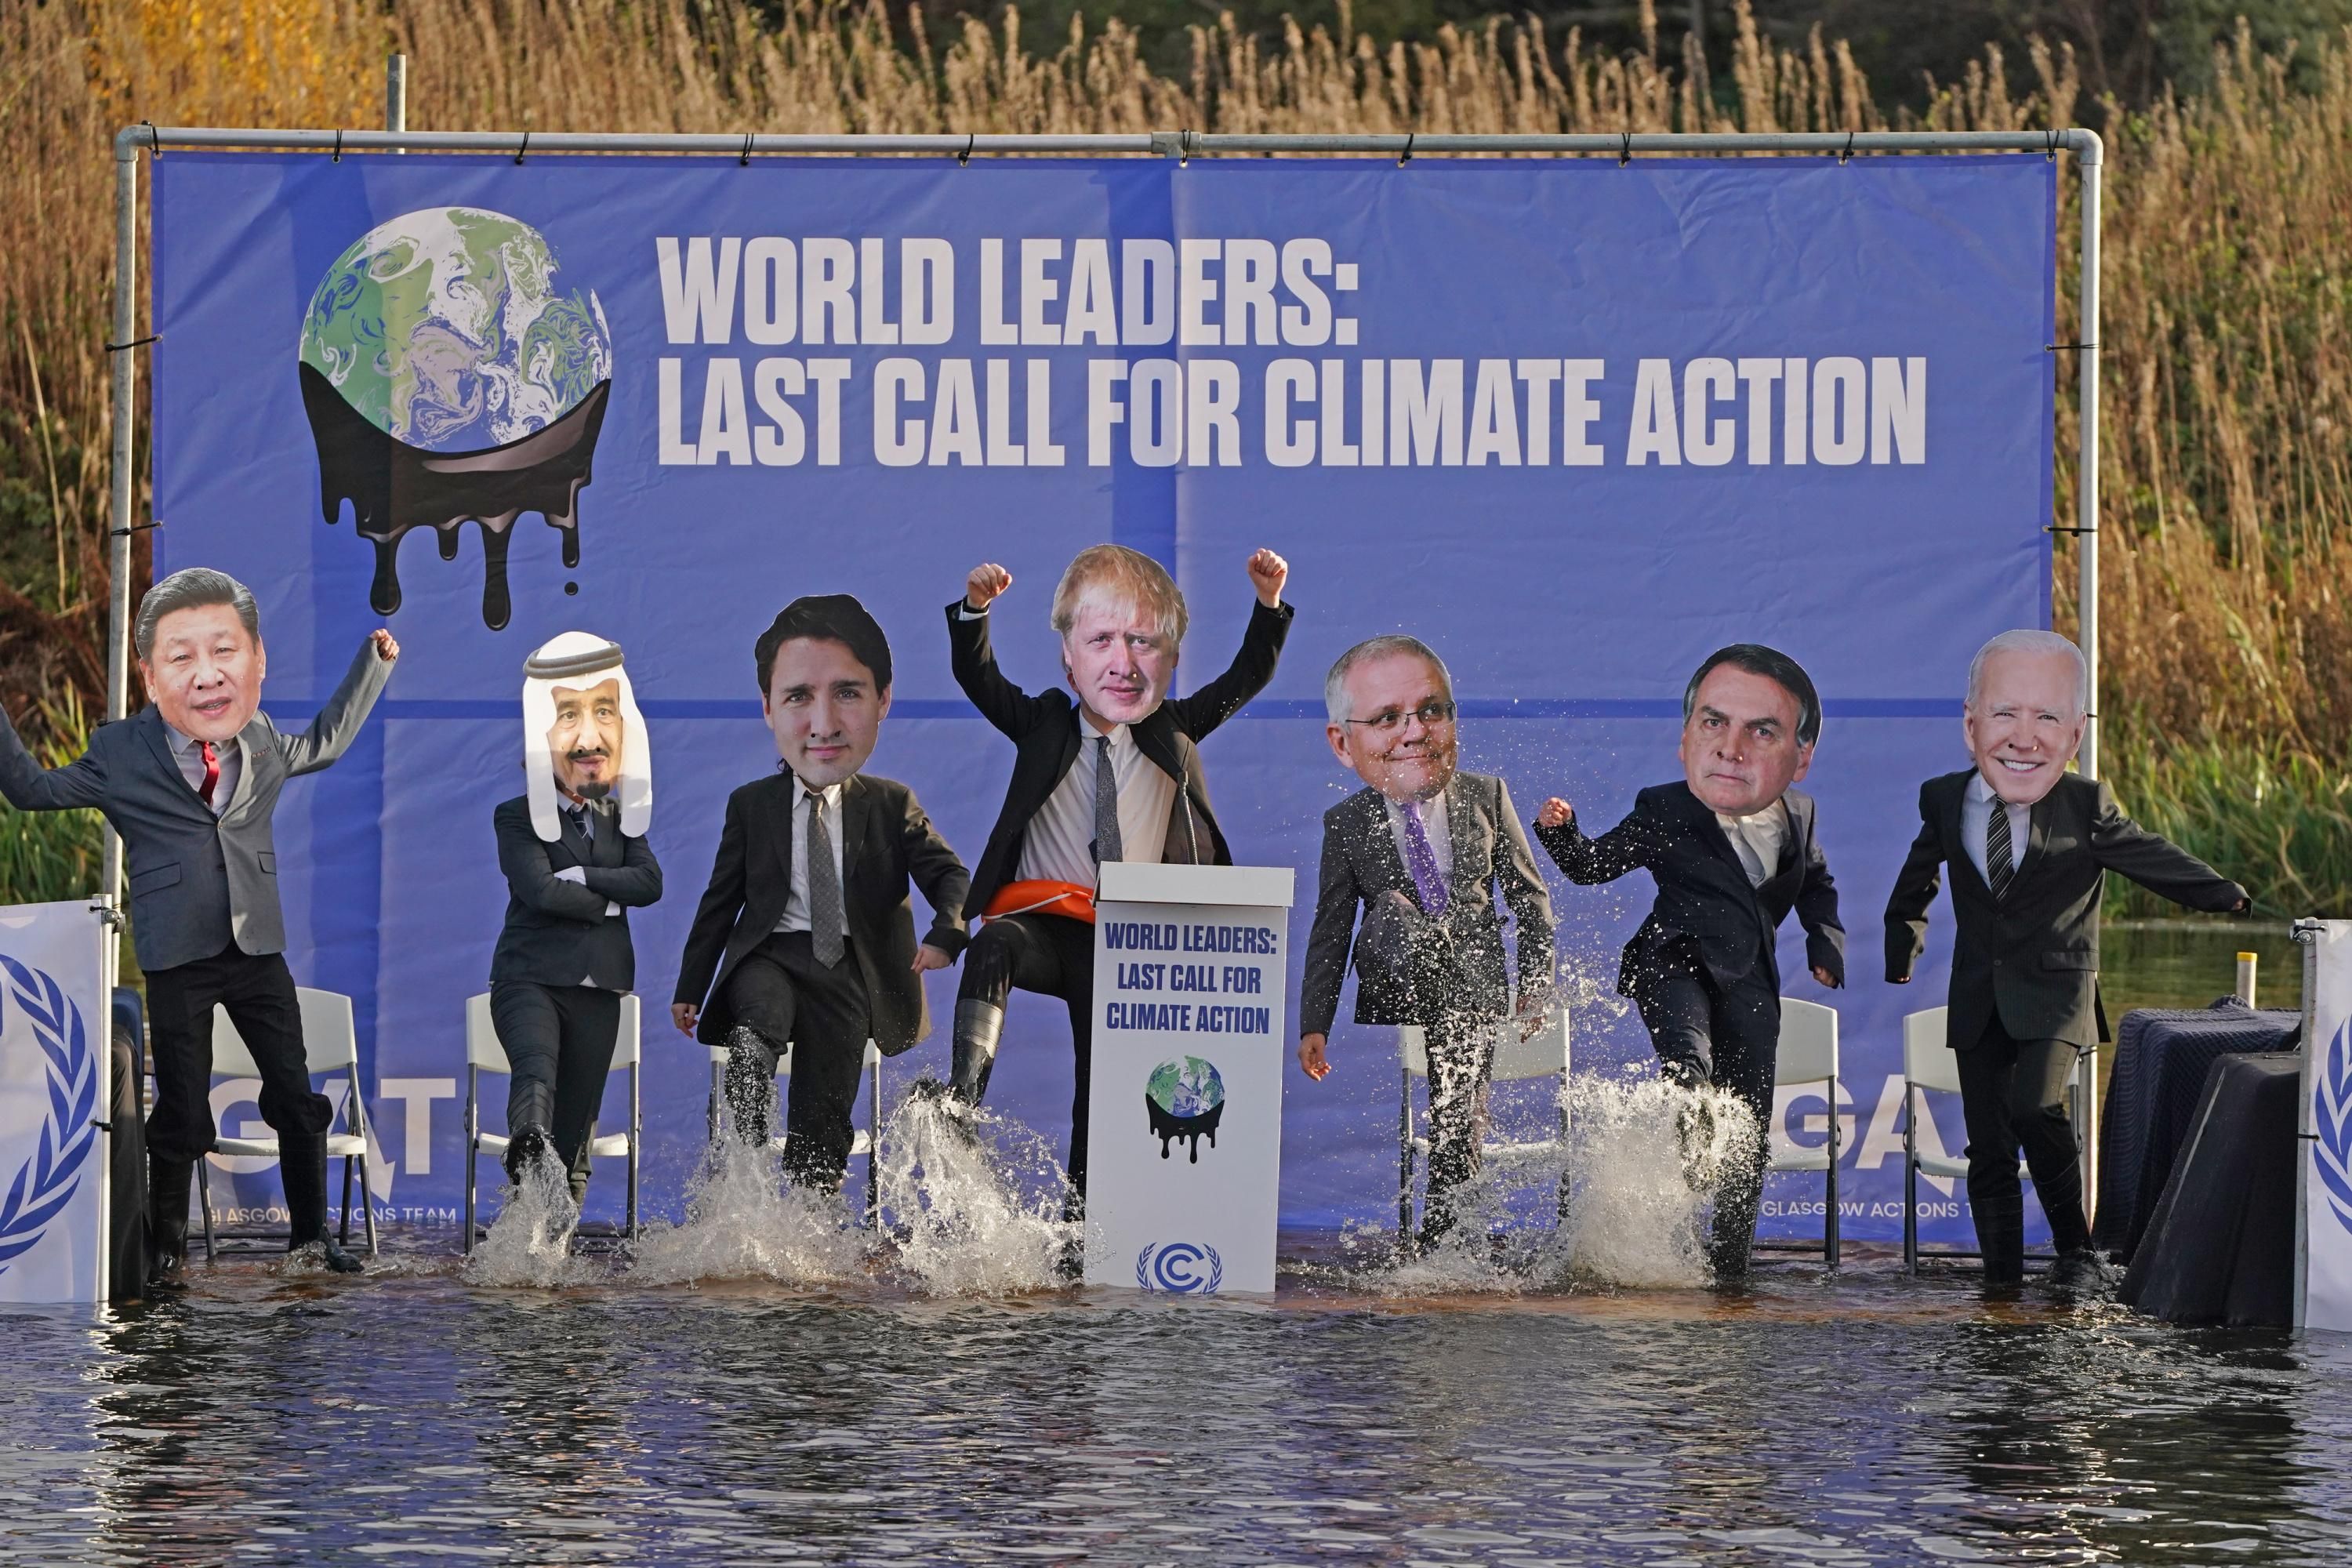 A protest targets world leaders at COP26.